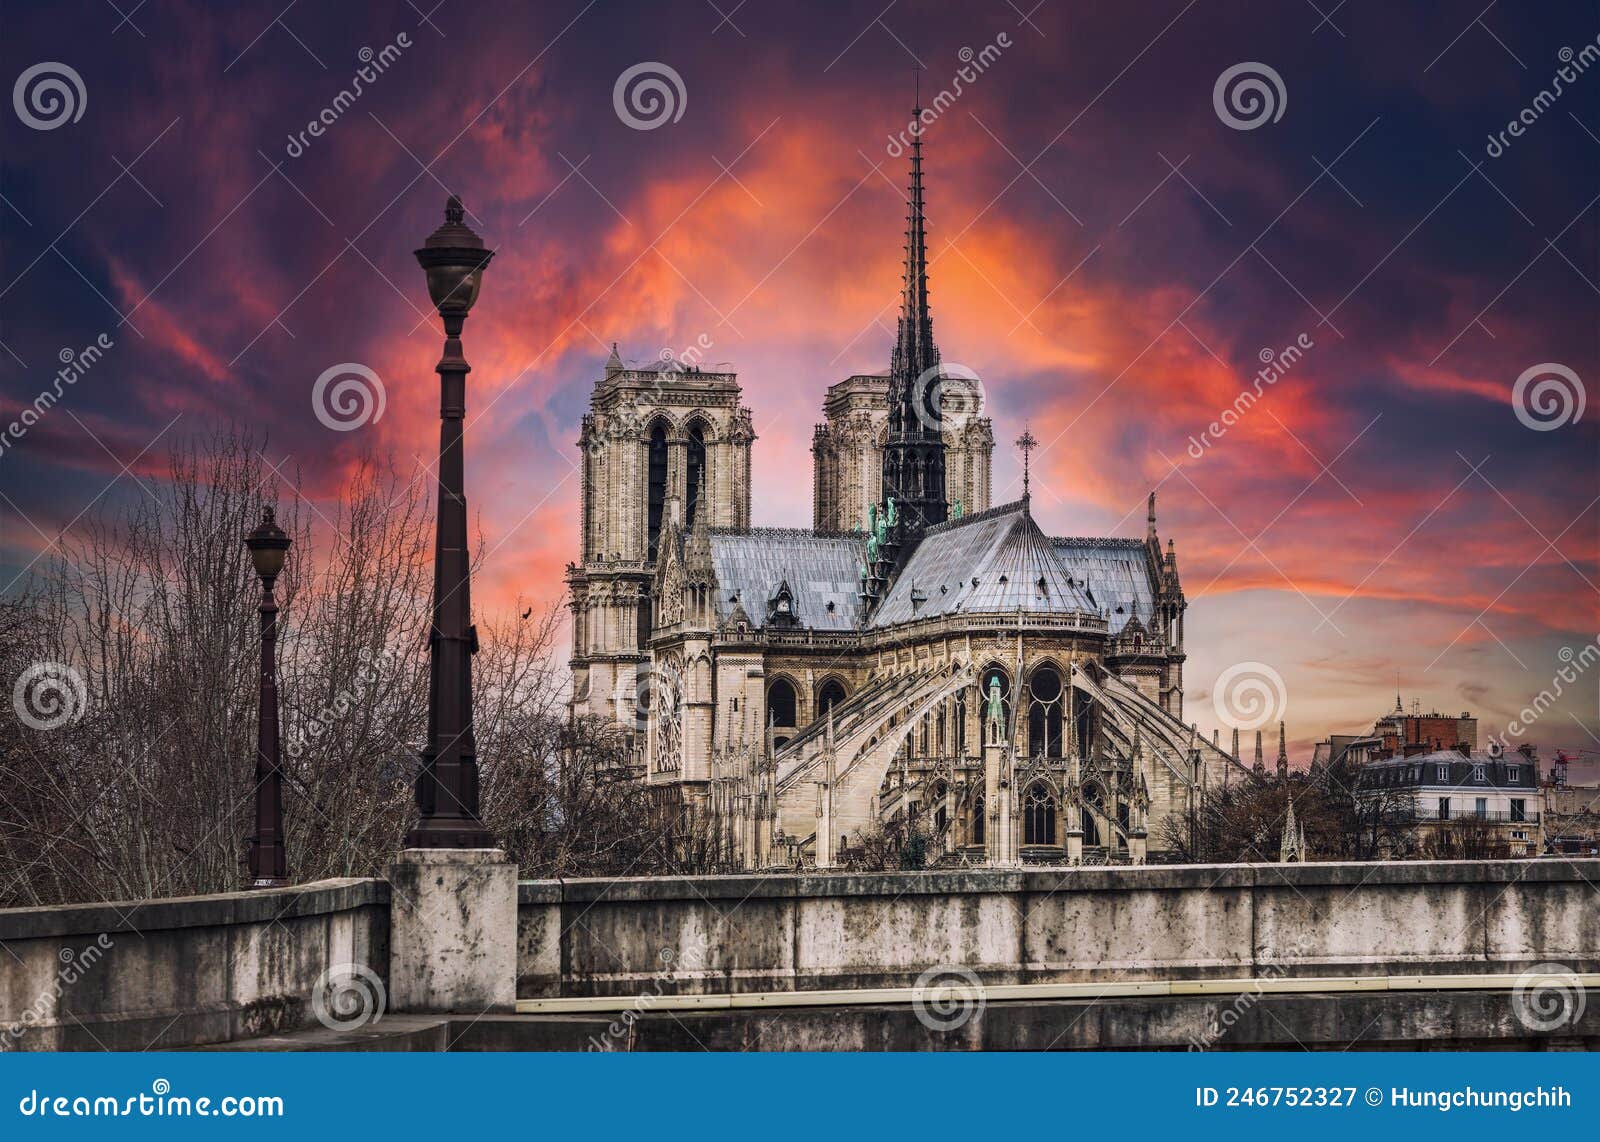 sunset over the notre-dame cathedral in paris - fance